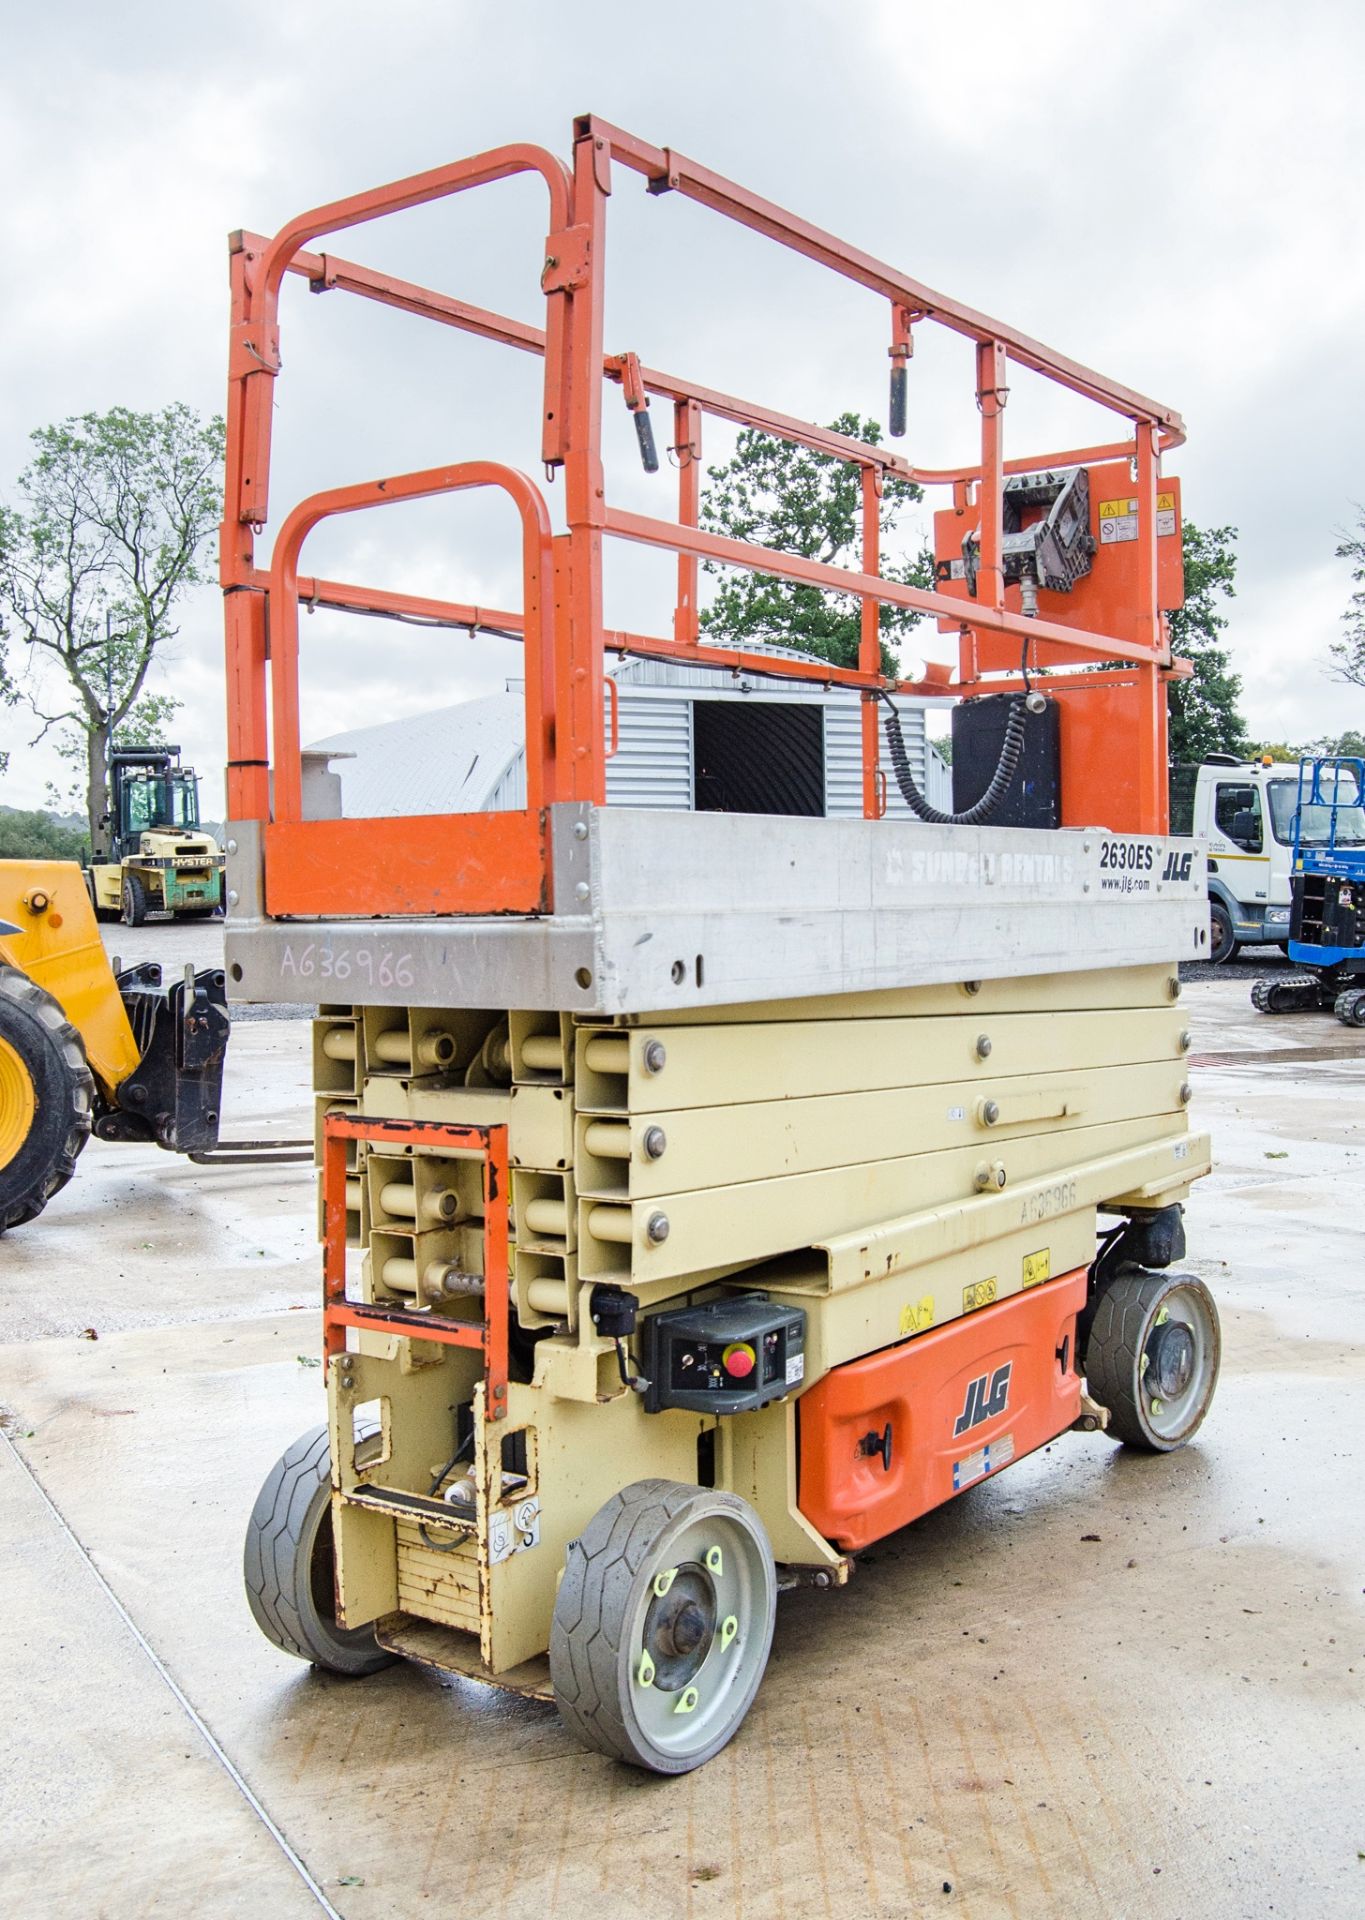 JLG 2630ES battery electric scissor lift access platform Year: 2014 S/N: 236753 Recorded Hours: - Image 3 of 14